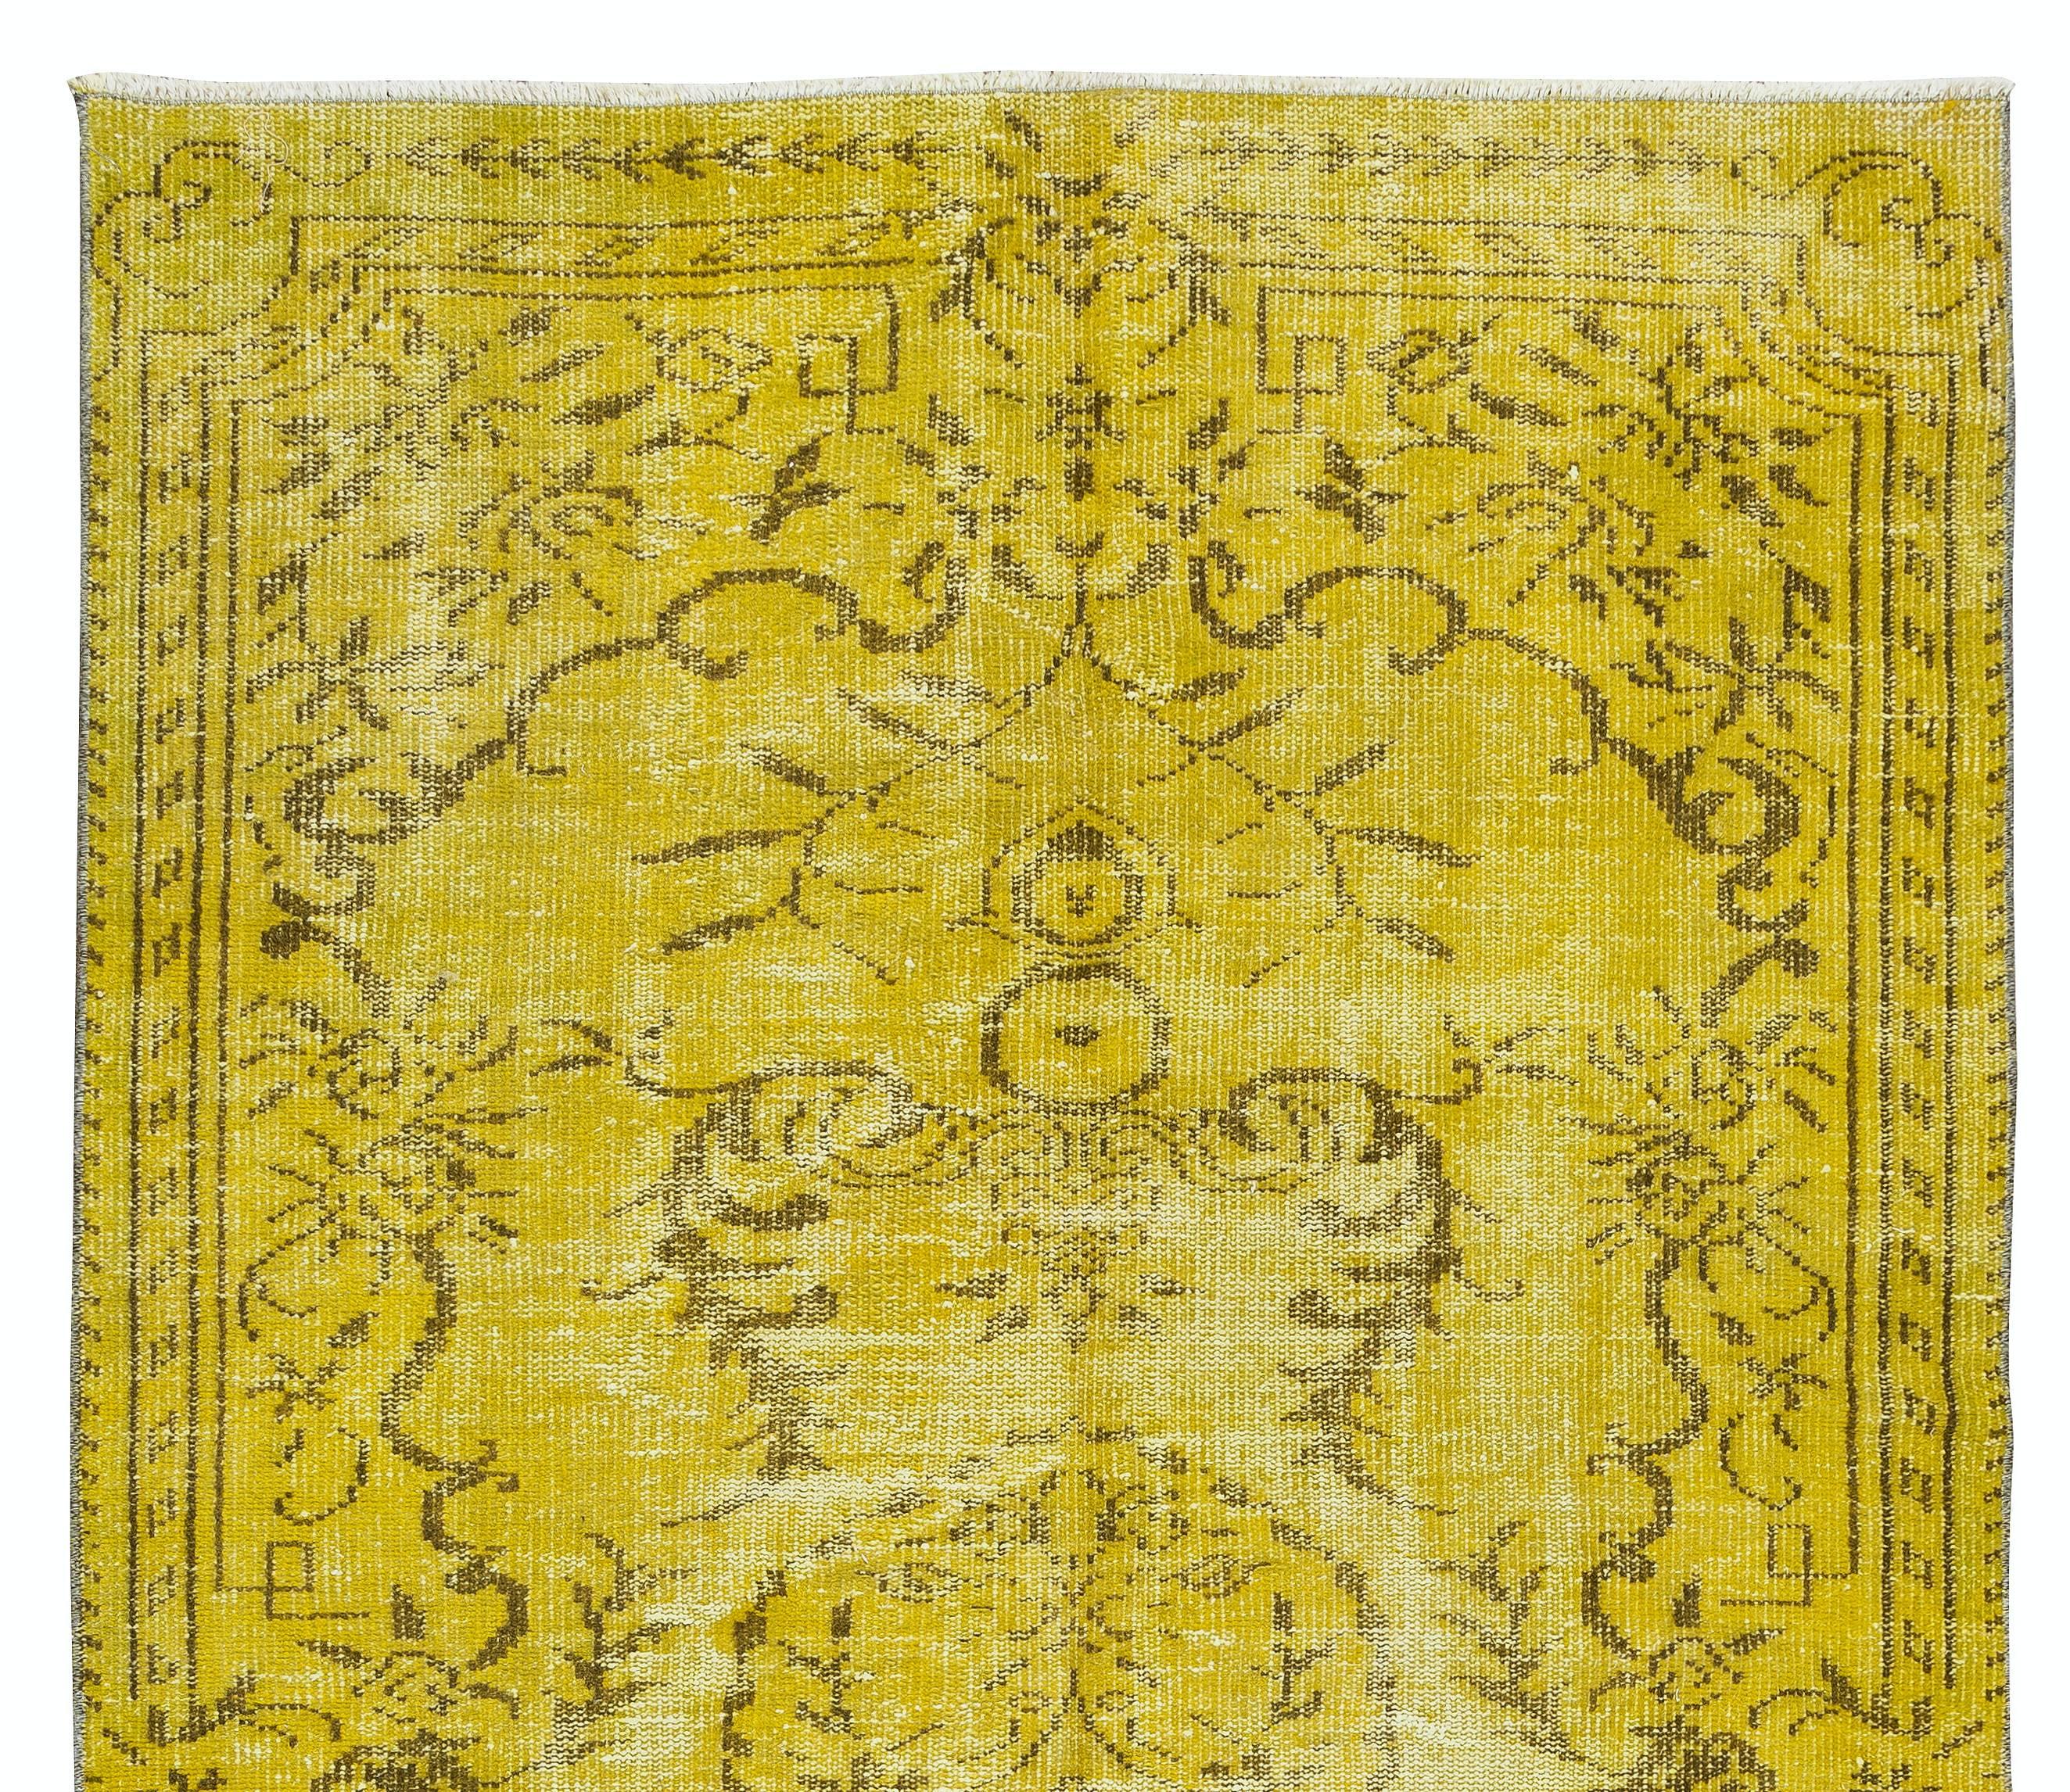 4.8x8.5 Ft Handmade Vintage Turkish Area Rug, Modern Yellow Carpet In Good Condition For Sale In Philadelphia, PA